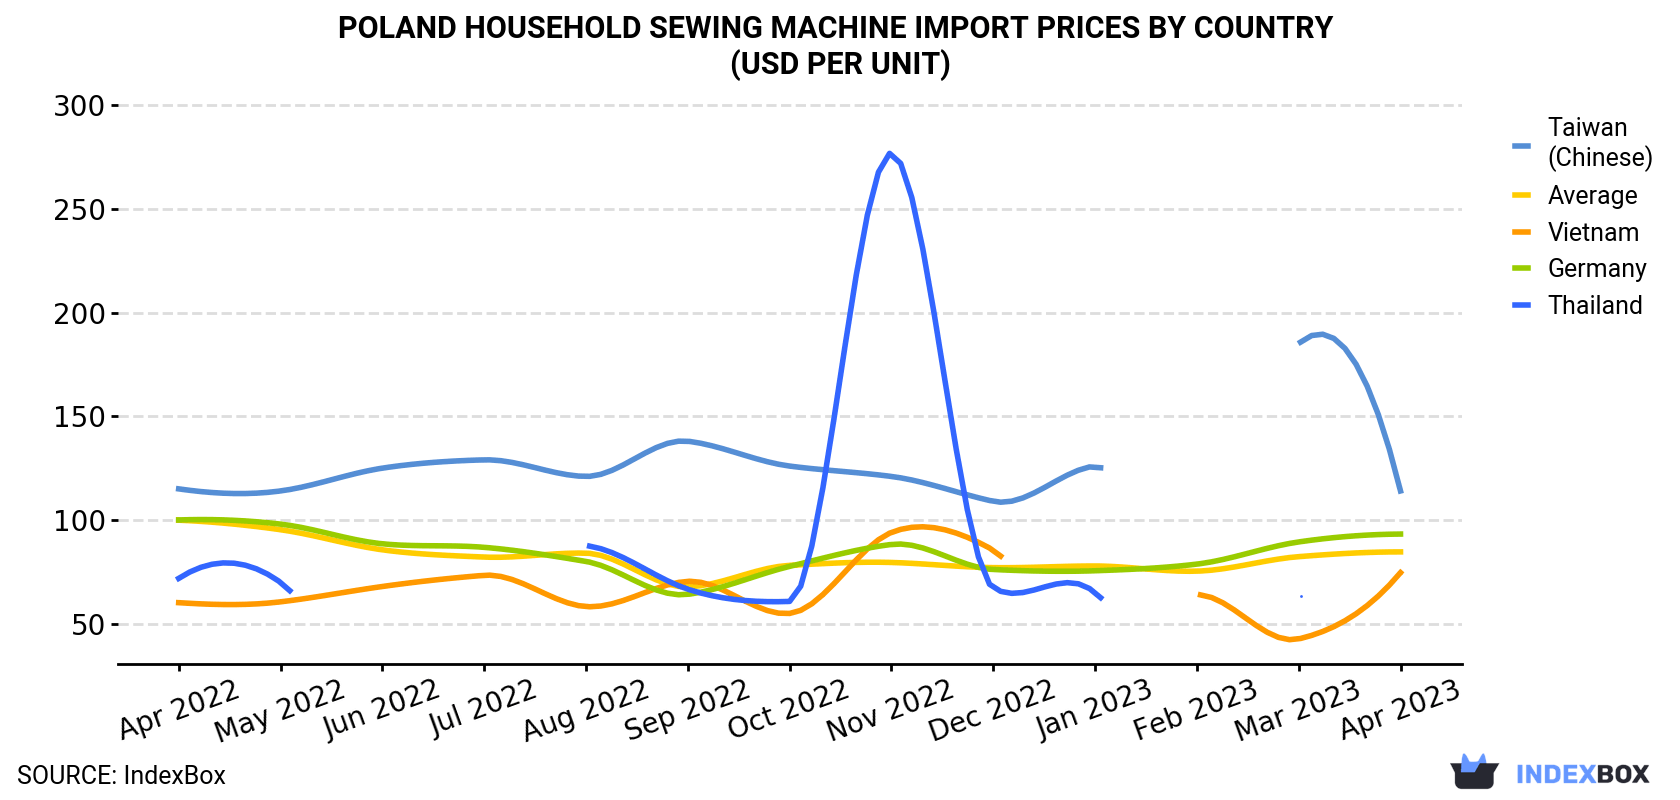 Poland Household Sewing Machine Import Prices By Country (USD Per Unit)